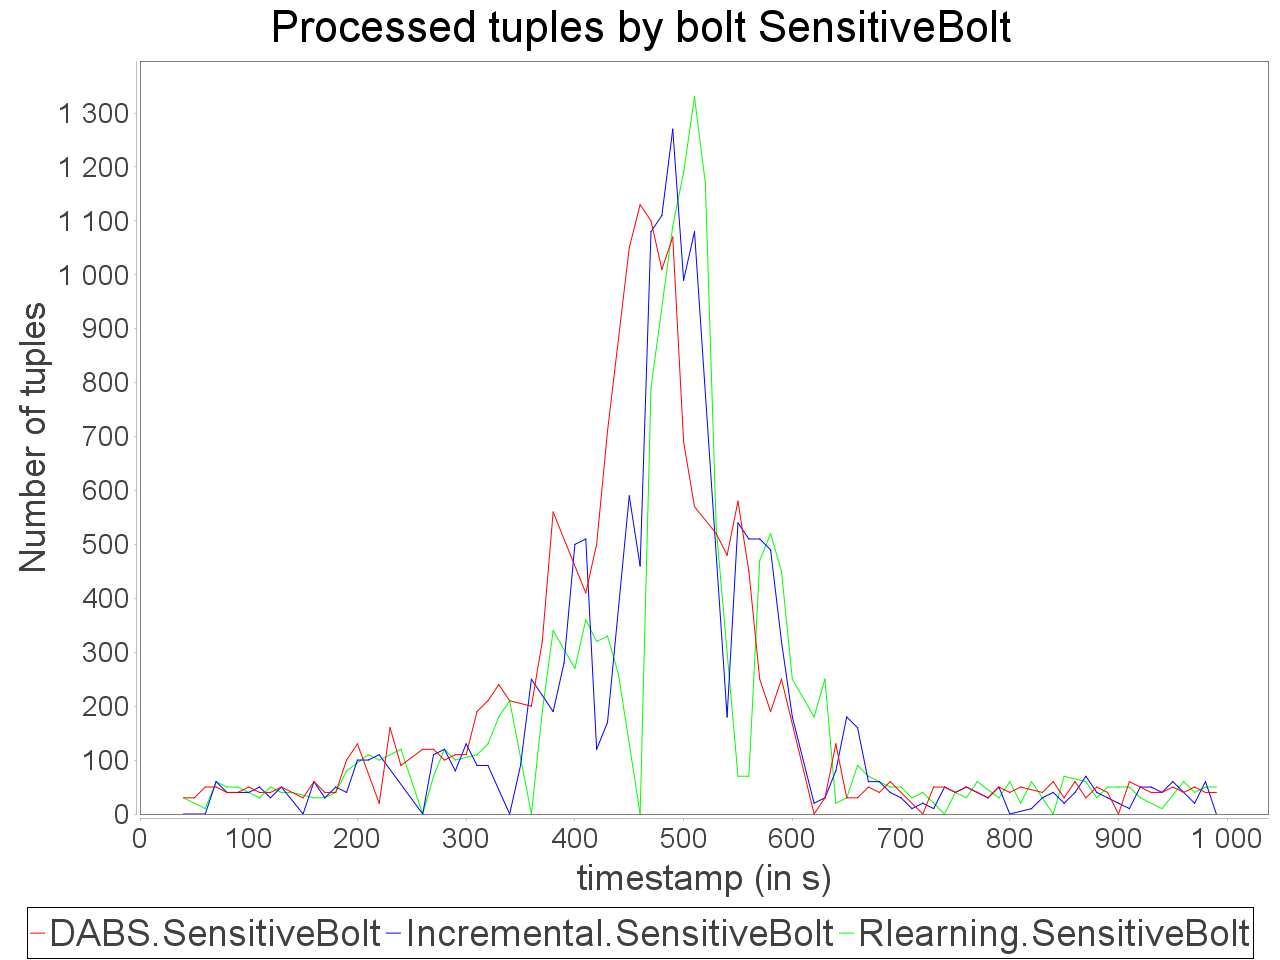 Processed tuples by sensitive bolt